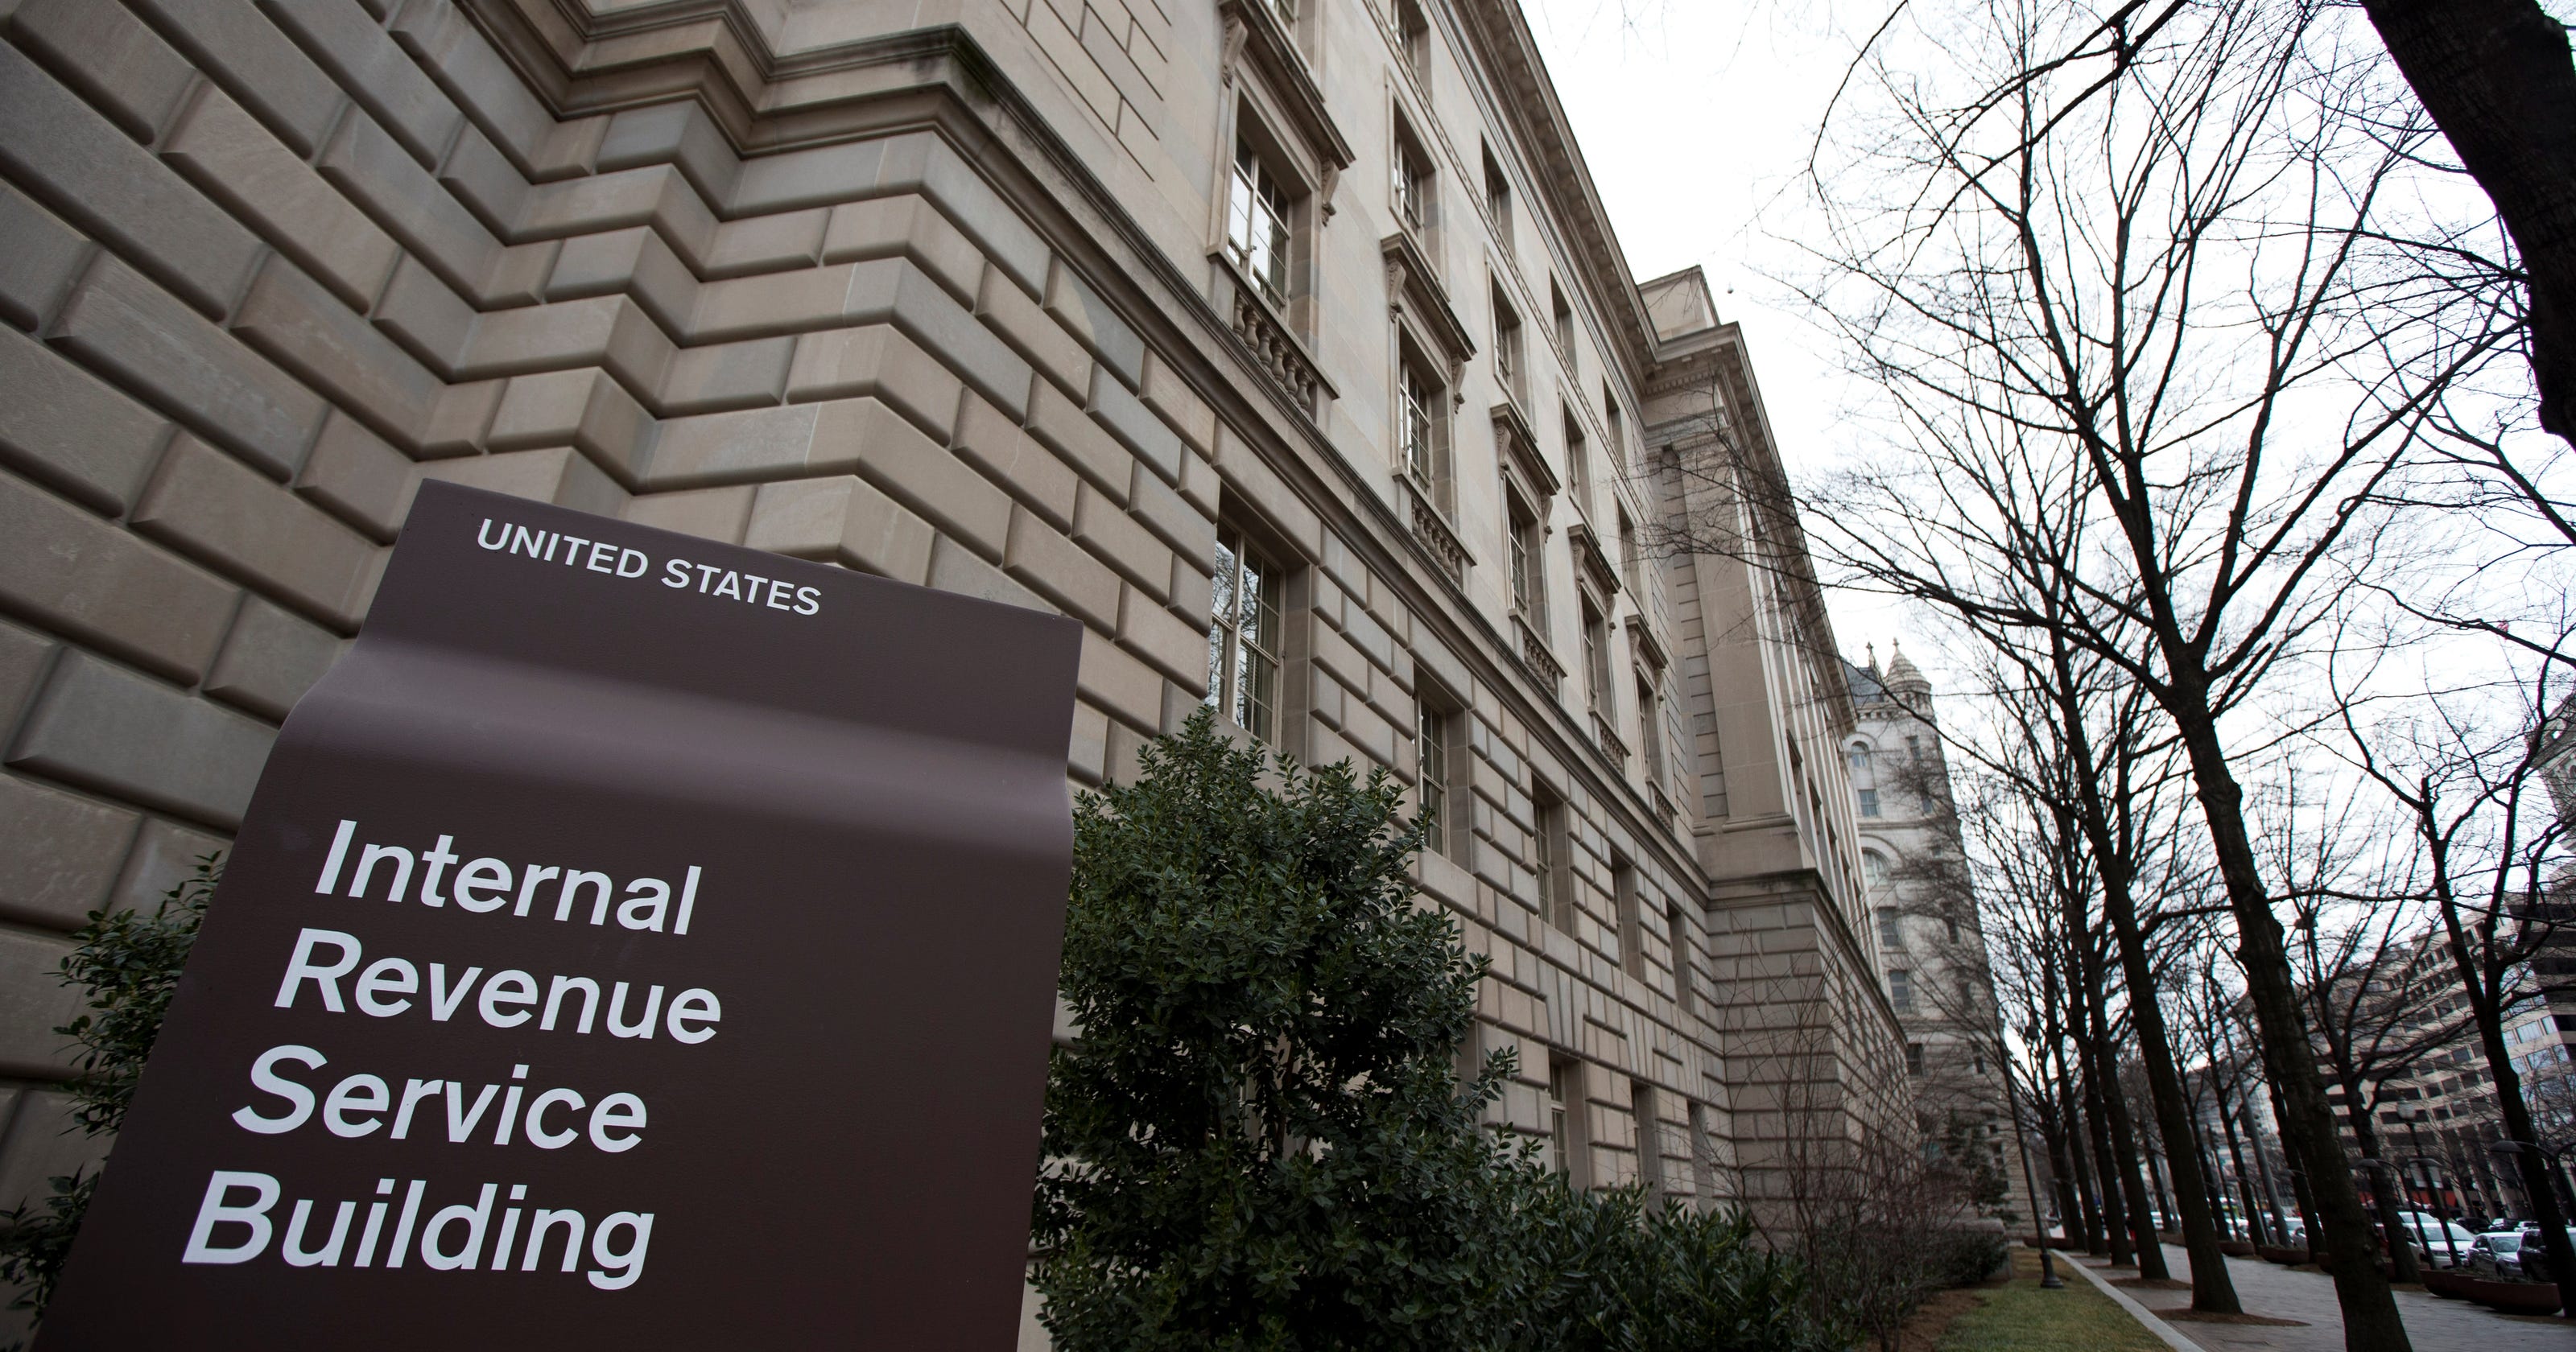 Q&A: The IRS-Tea Party scandal explained